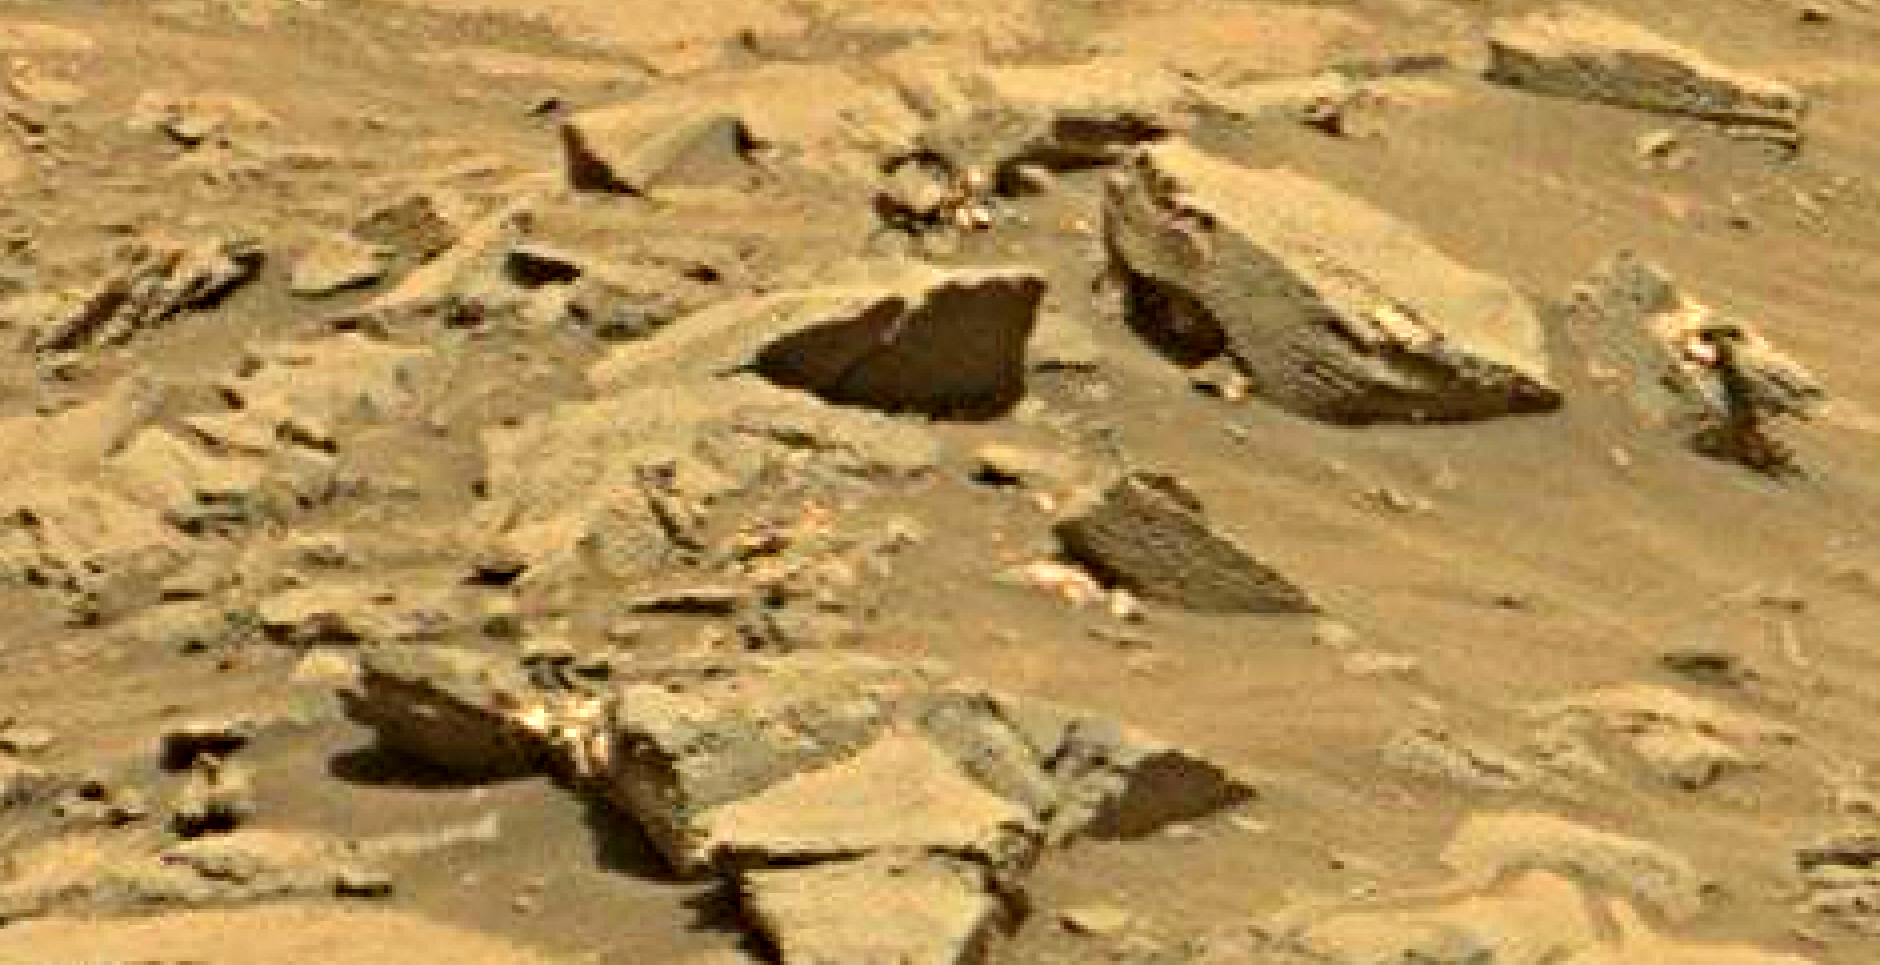 mars sol 1353 anomaly-artifacts 41 was life on mars